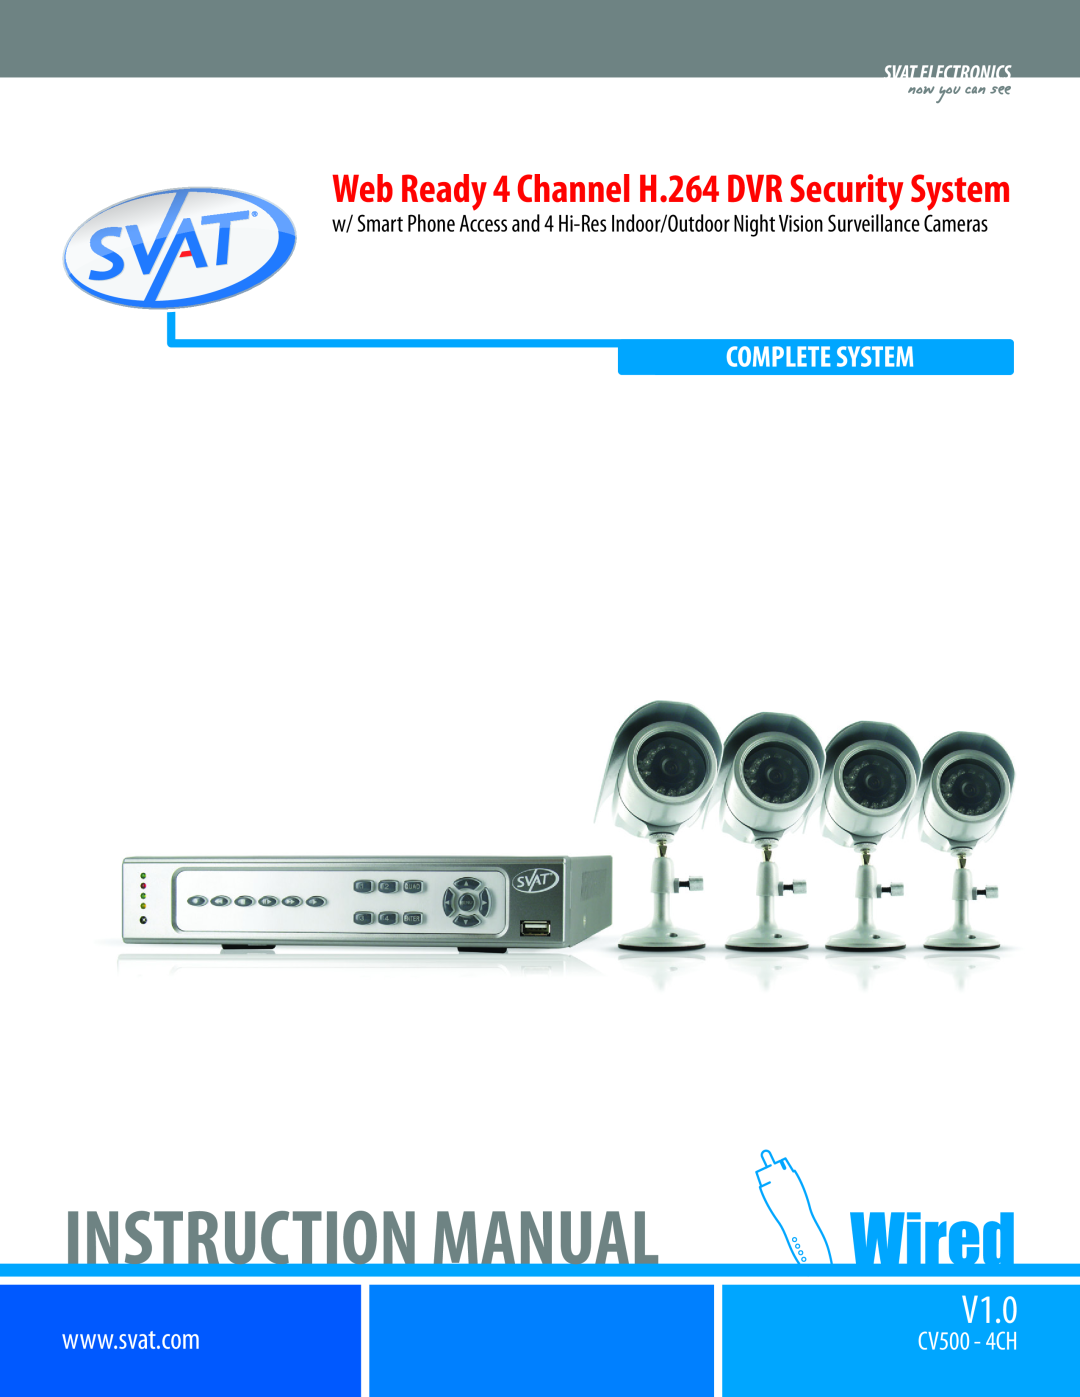 SVAT Electronics 2CV500 - 4CH instruction manual Complete System, Instruction Manual, V1.0, now you can see 